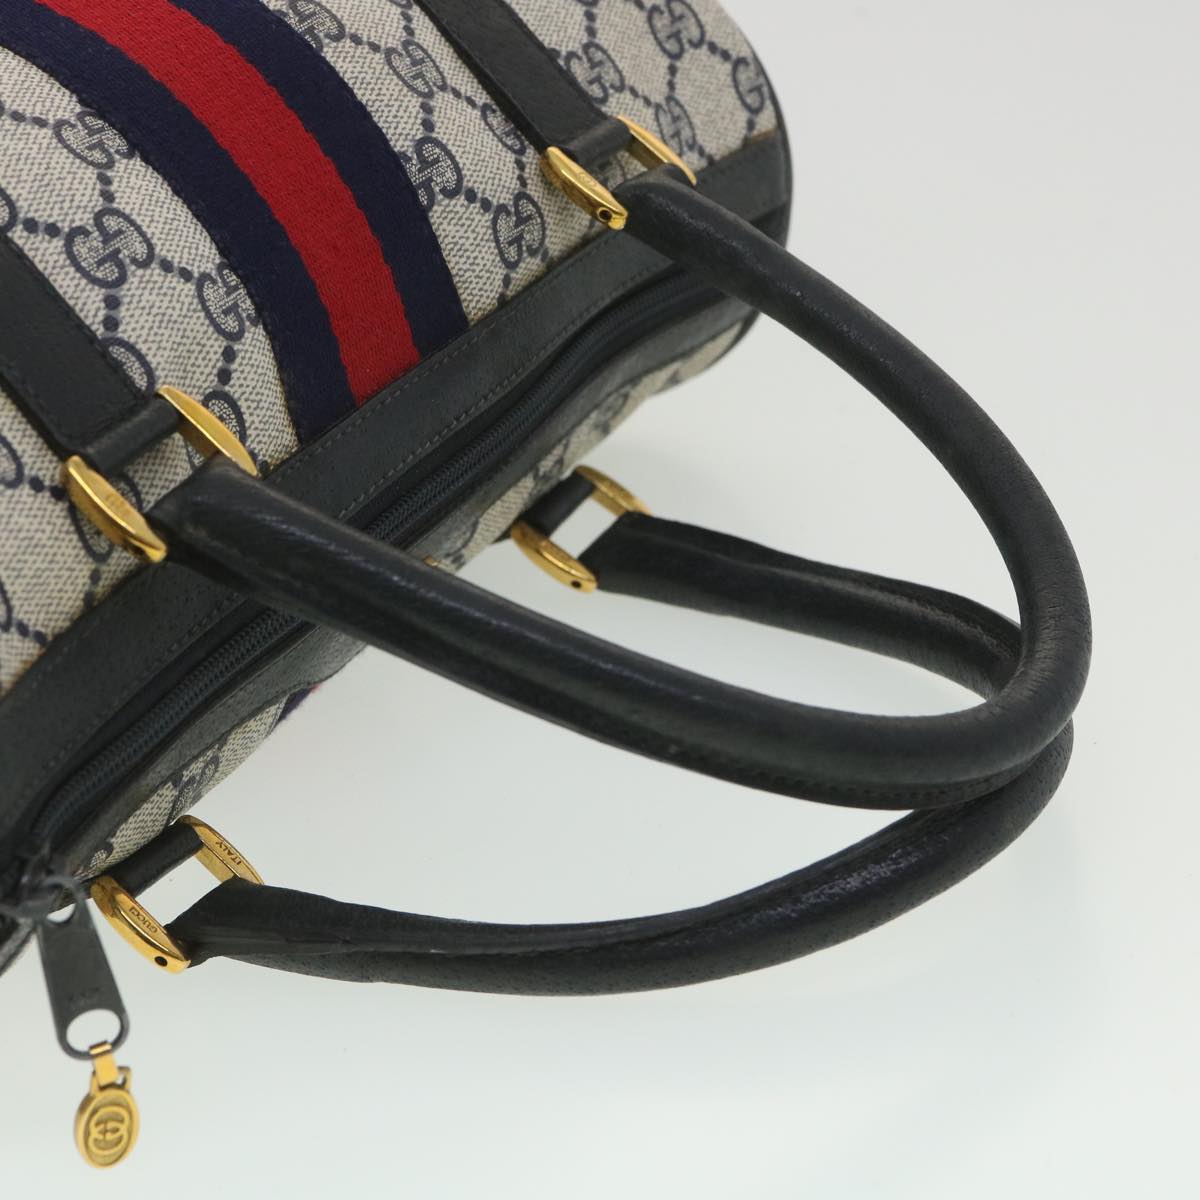 GUCCI Sherry Line GG Canvas Boston Bag PVC Leather Navy Red Auth yk5679B